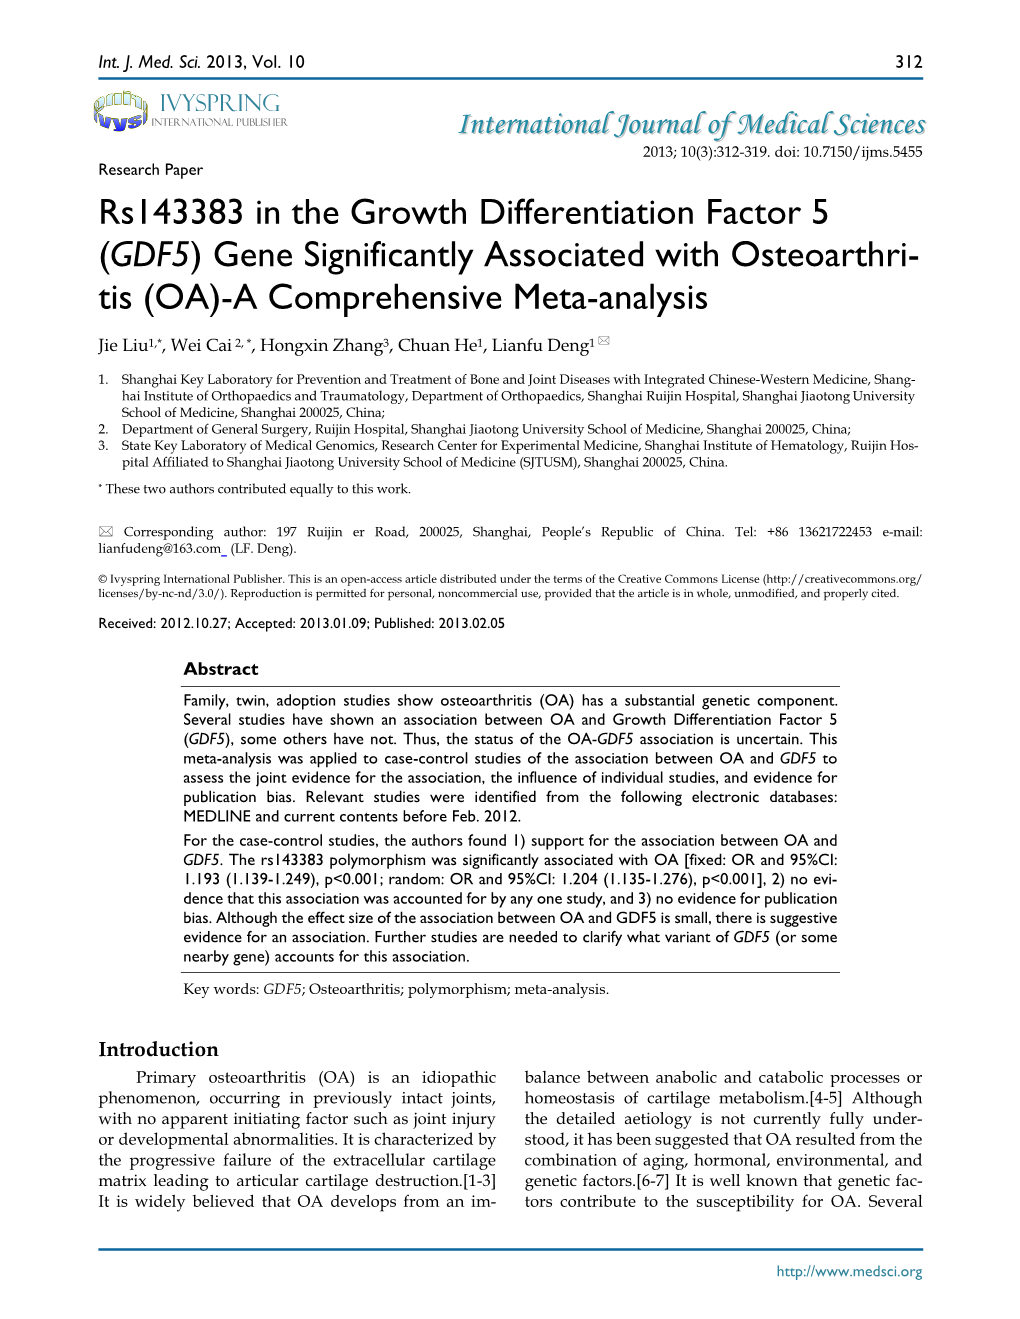 Rs143383 in the Growth Differentiation Factor 5 (GDF5) Gene Significantly Associated with Osteoarthri- Tis (OA)-A Comprehensive Meta-Analysis